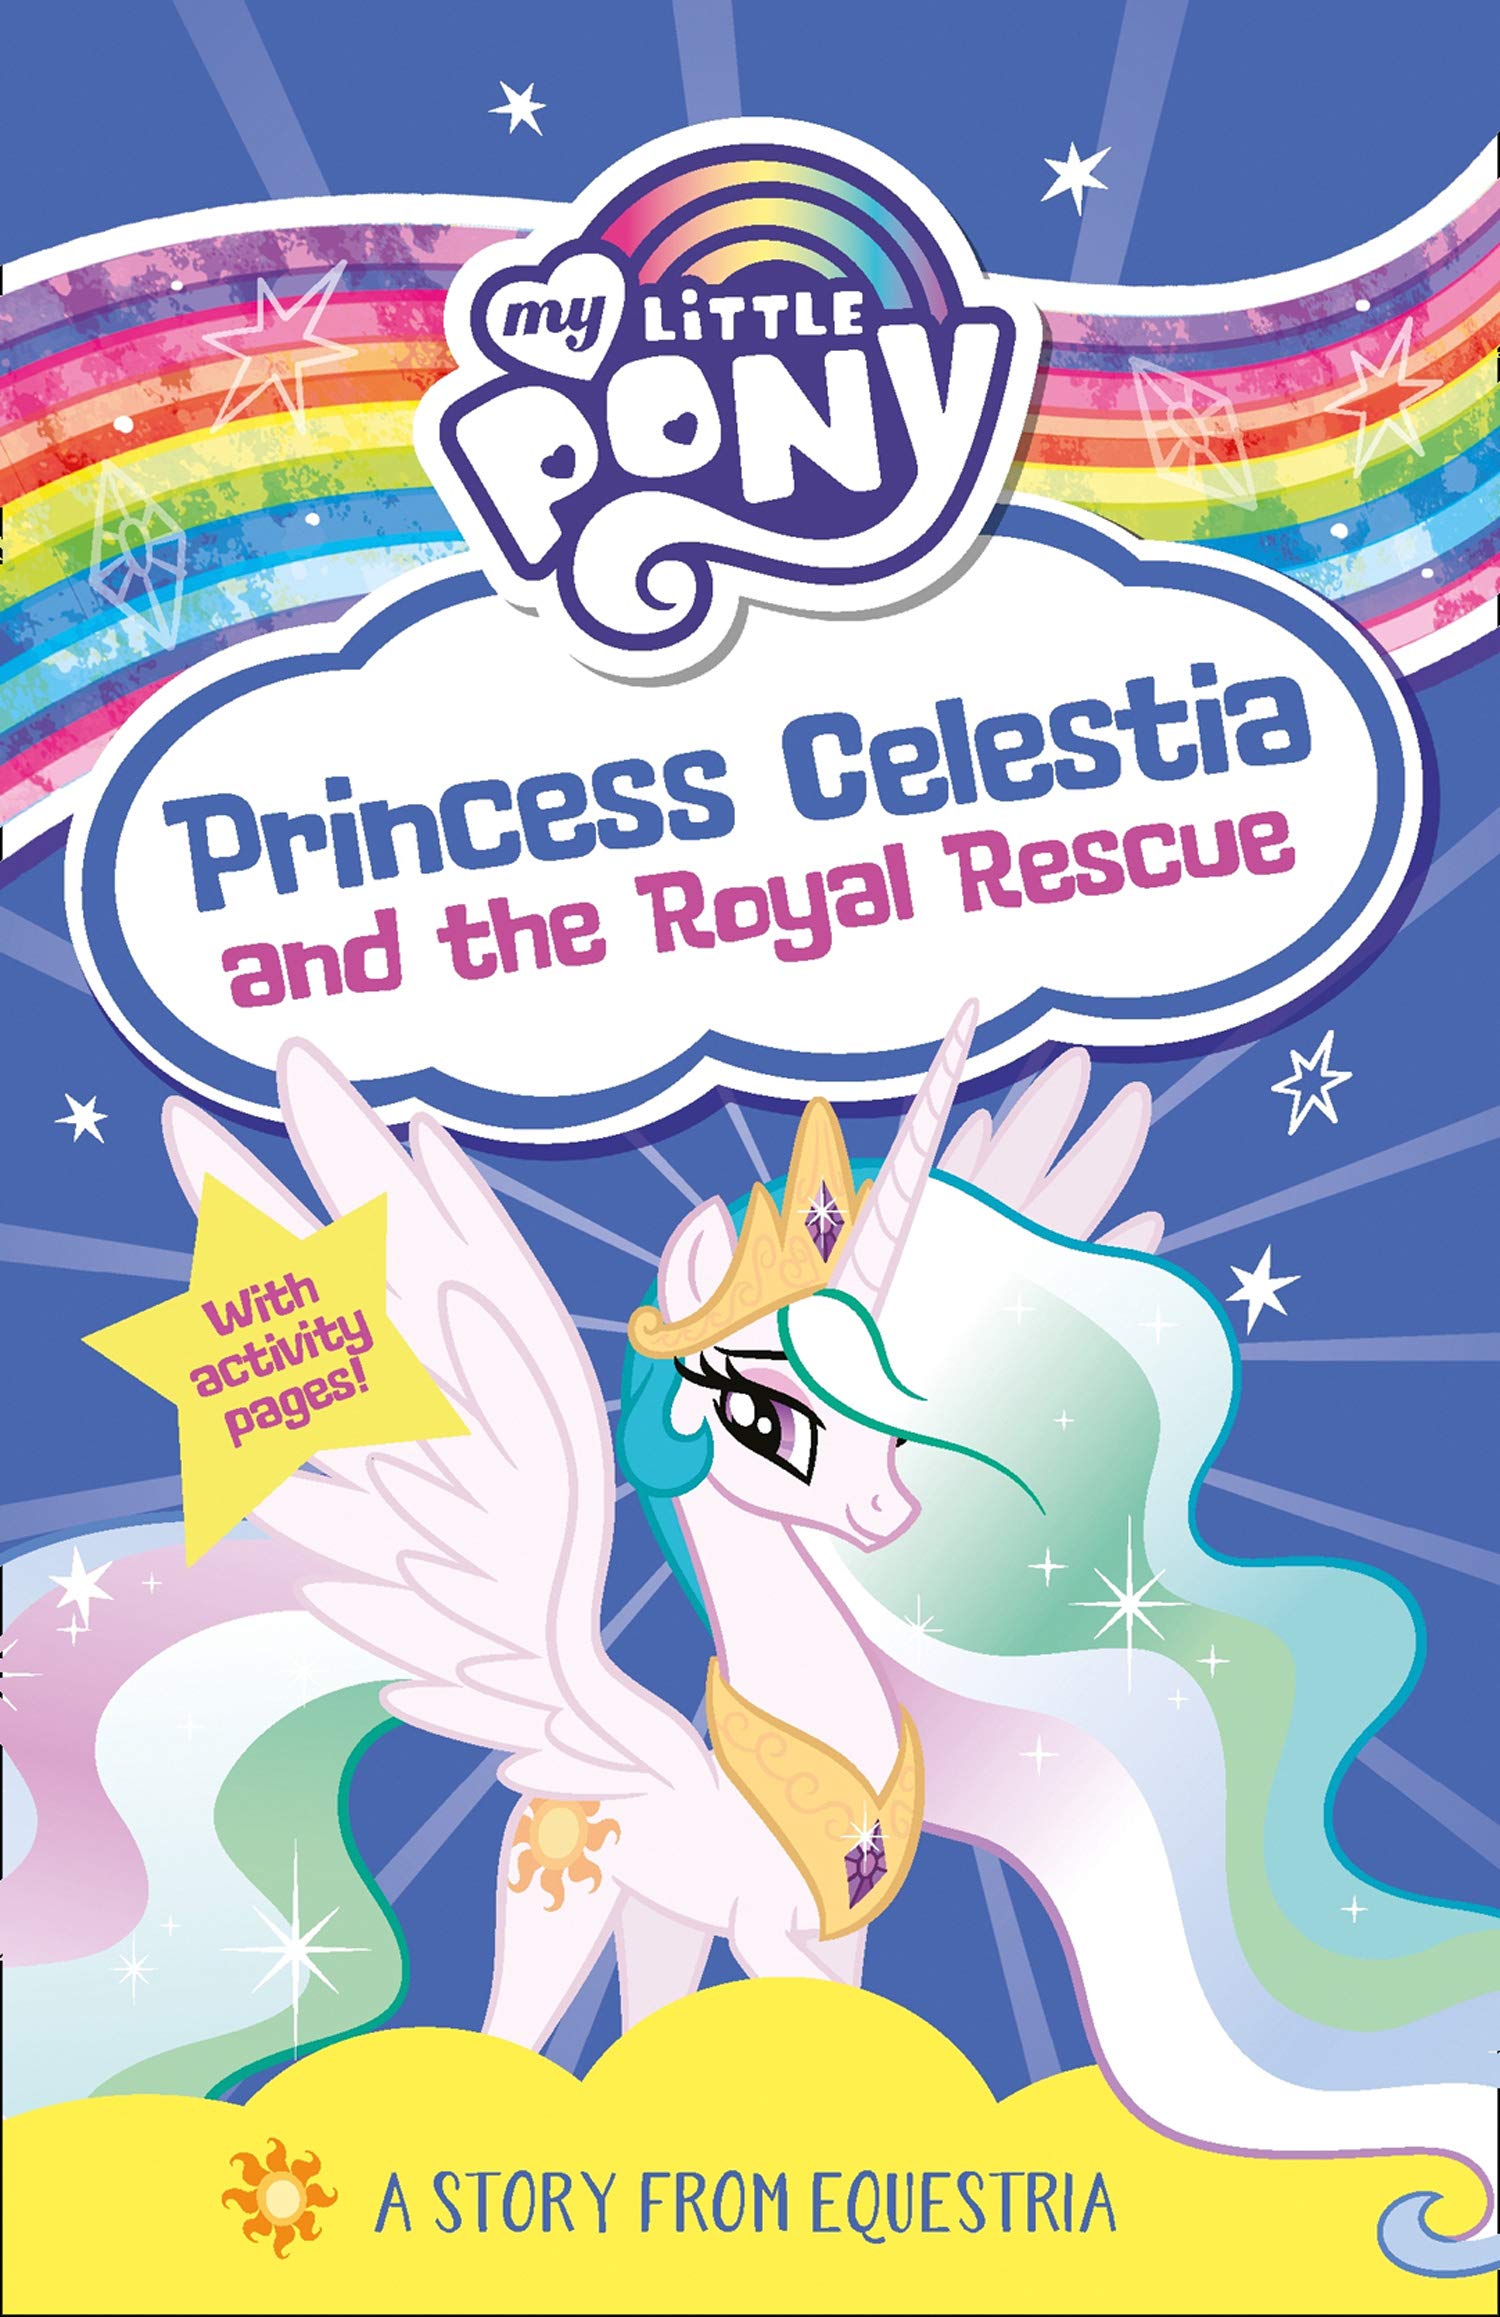 My Little Pony - Princess Celestia and the Royal Rescue | 